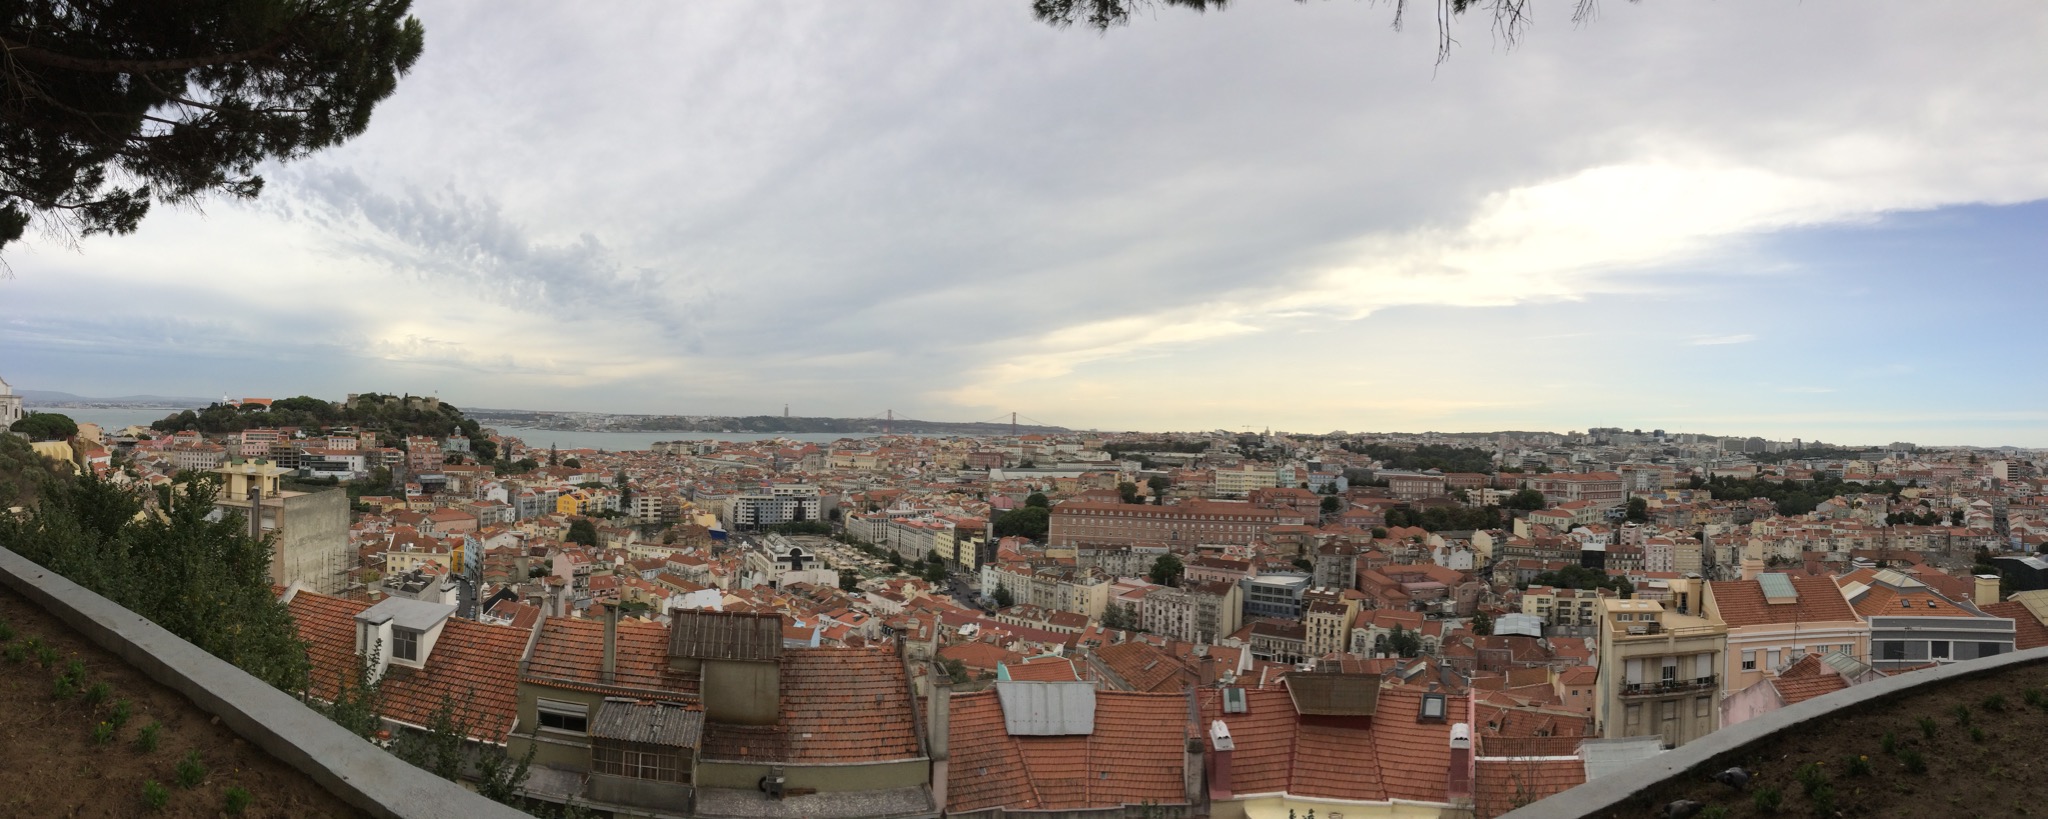 Photo 5 of 86 from the album Highlights Lisbon 2015.